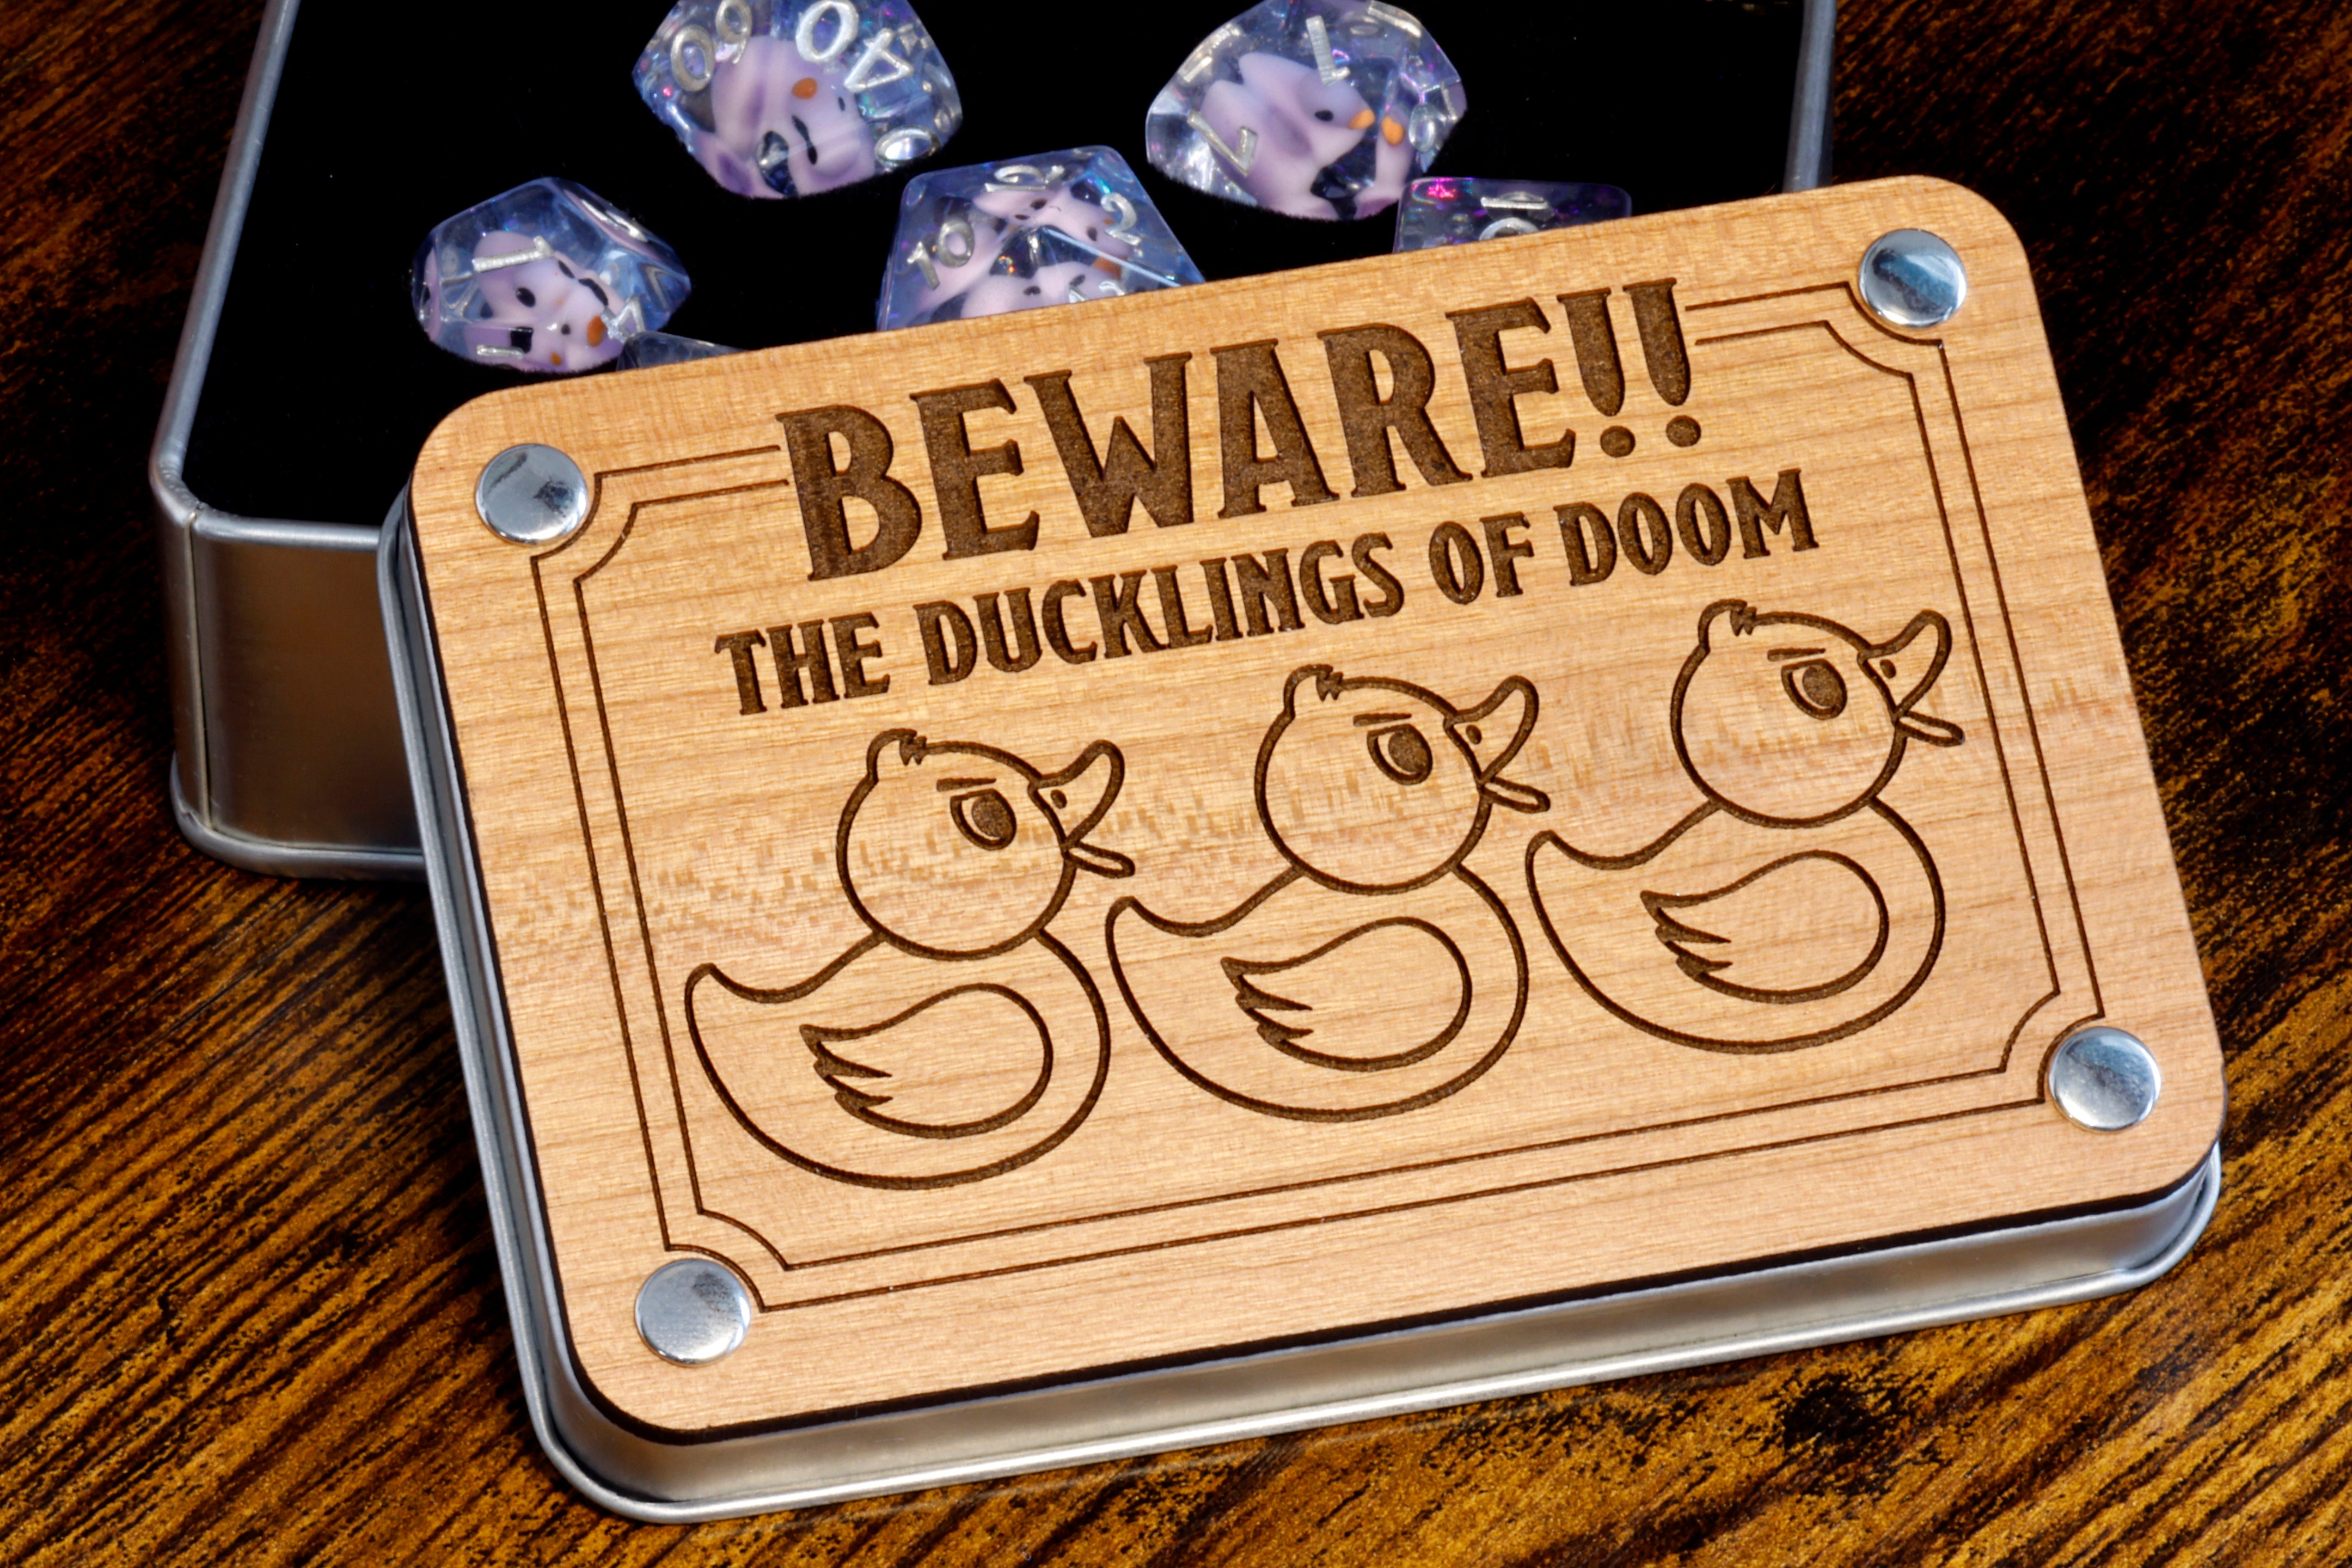 Behold !! The ducklings of doom dice set with metal box - The Wizard's Vault